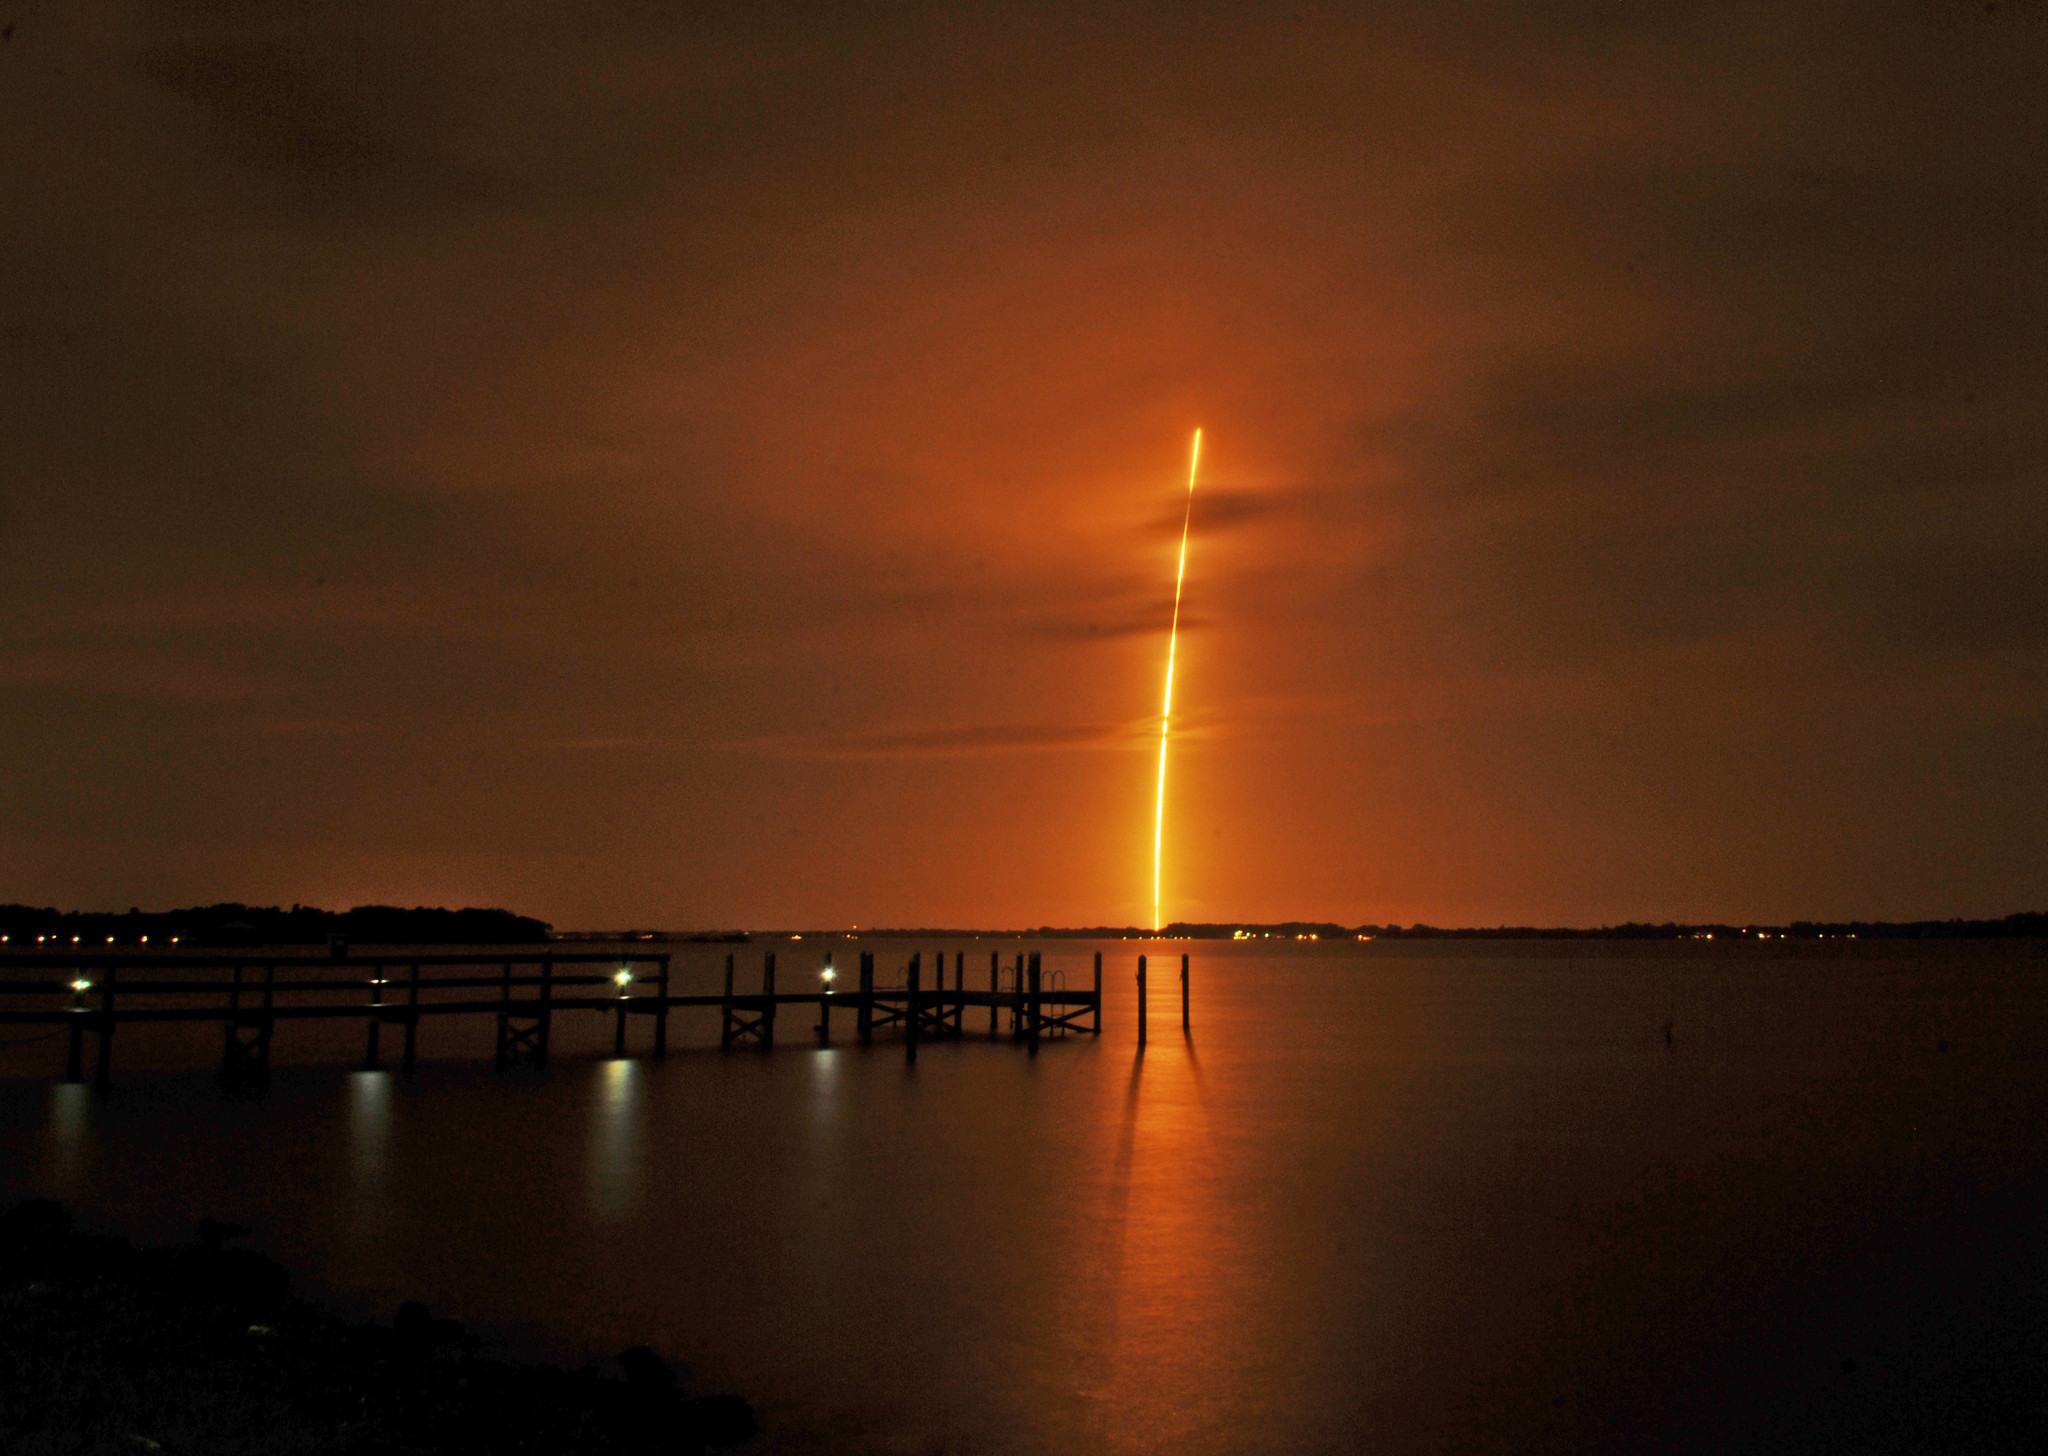 SpaceX launches Falcon 9 from Cape Canaveral - Orlando Sentinel2048 x 1456